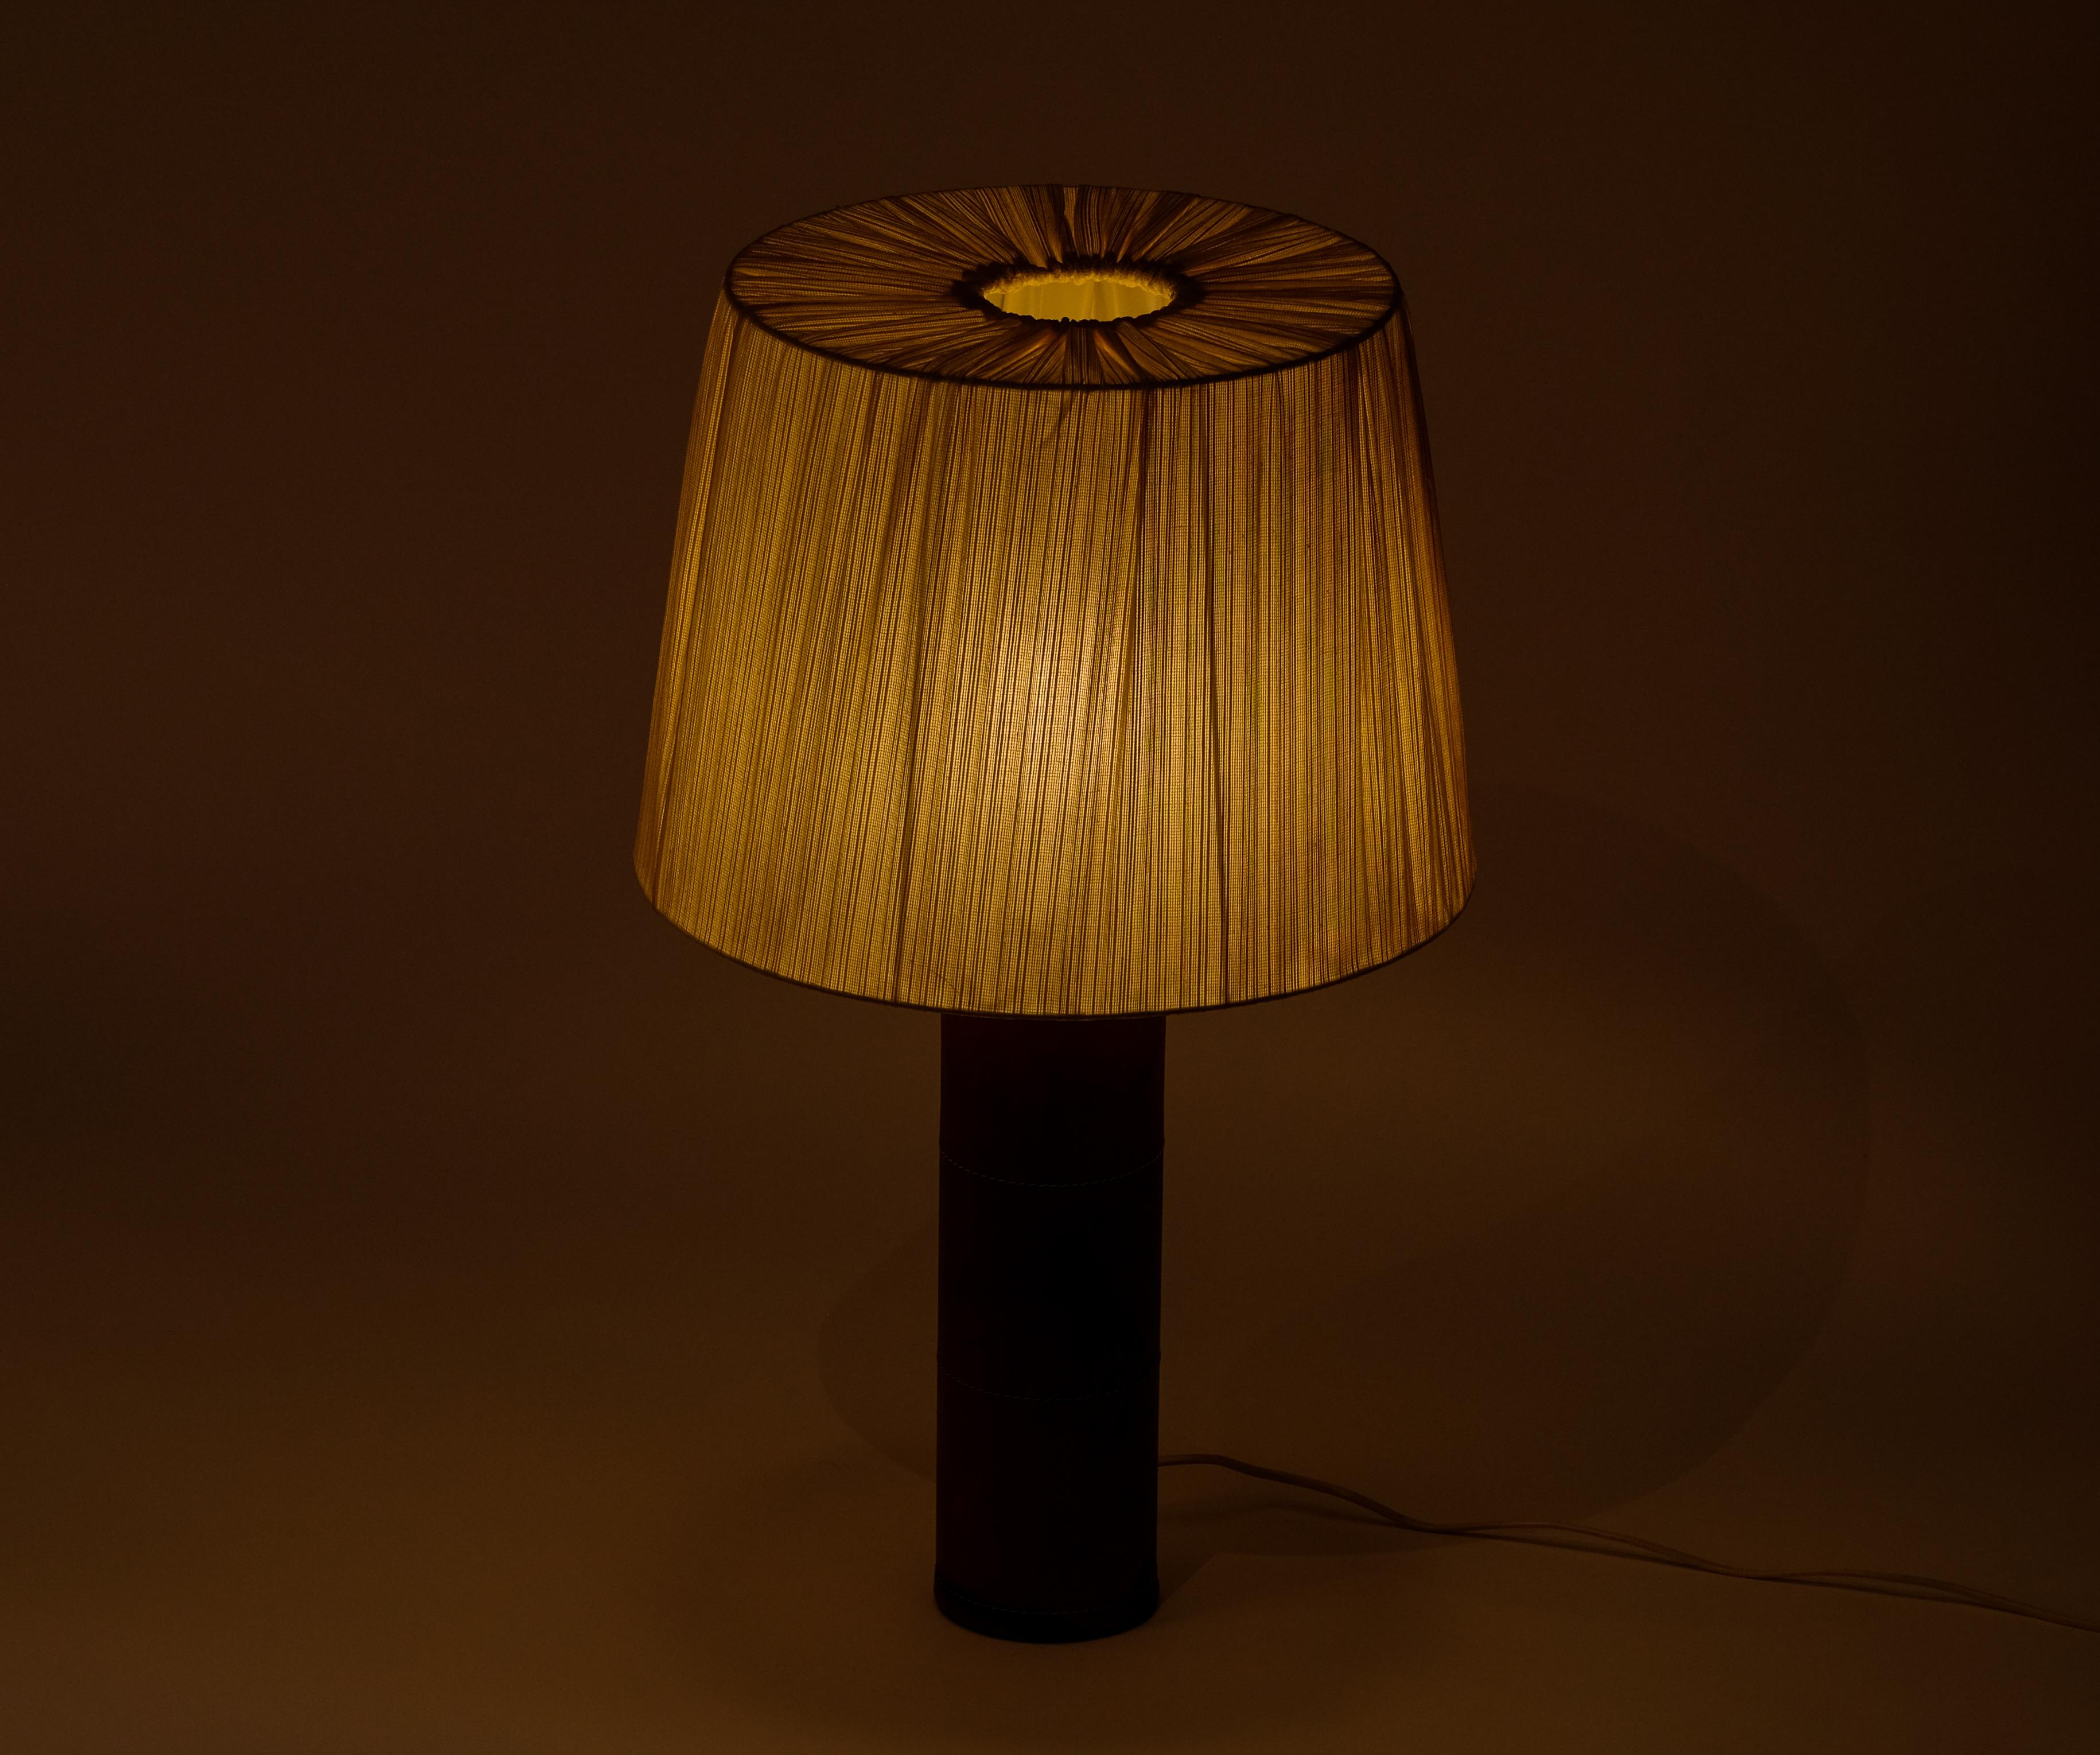 Table lamp in cognac brown leather manufactured by Bergboms, Sweden, 1960s.
Set of 2 available. New wiring.